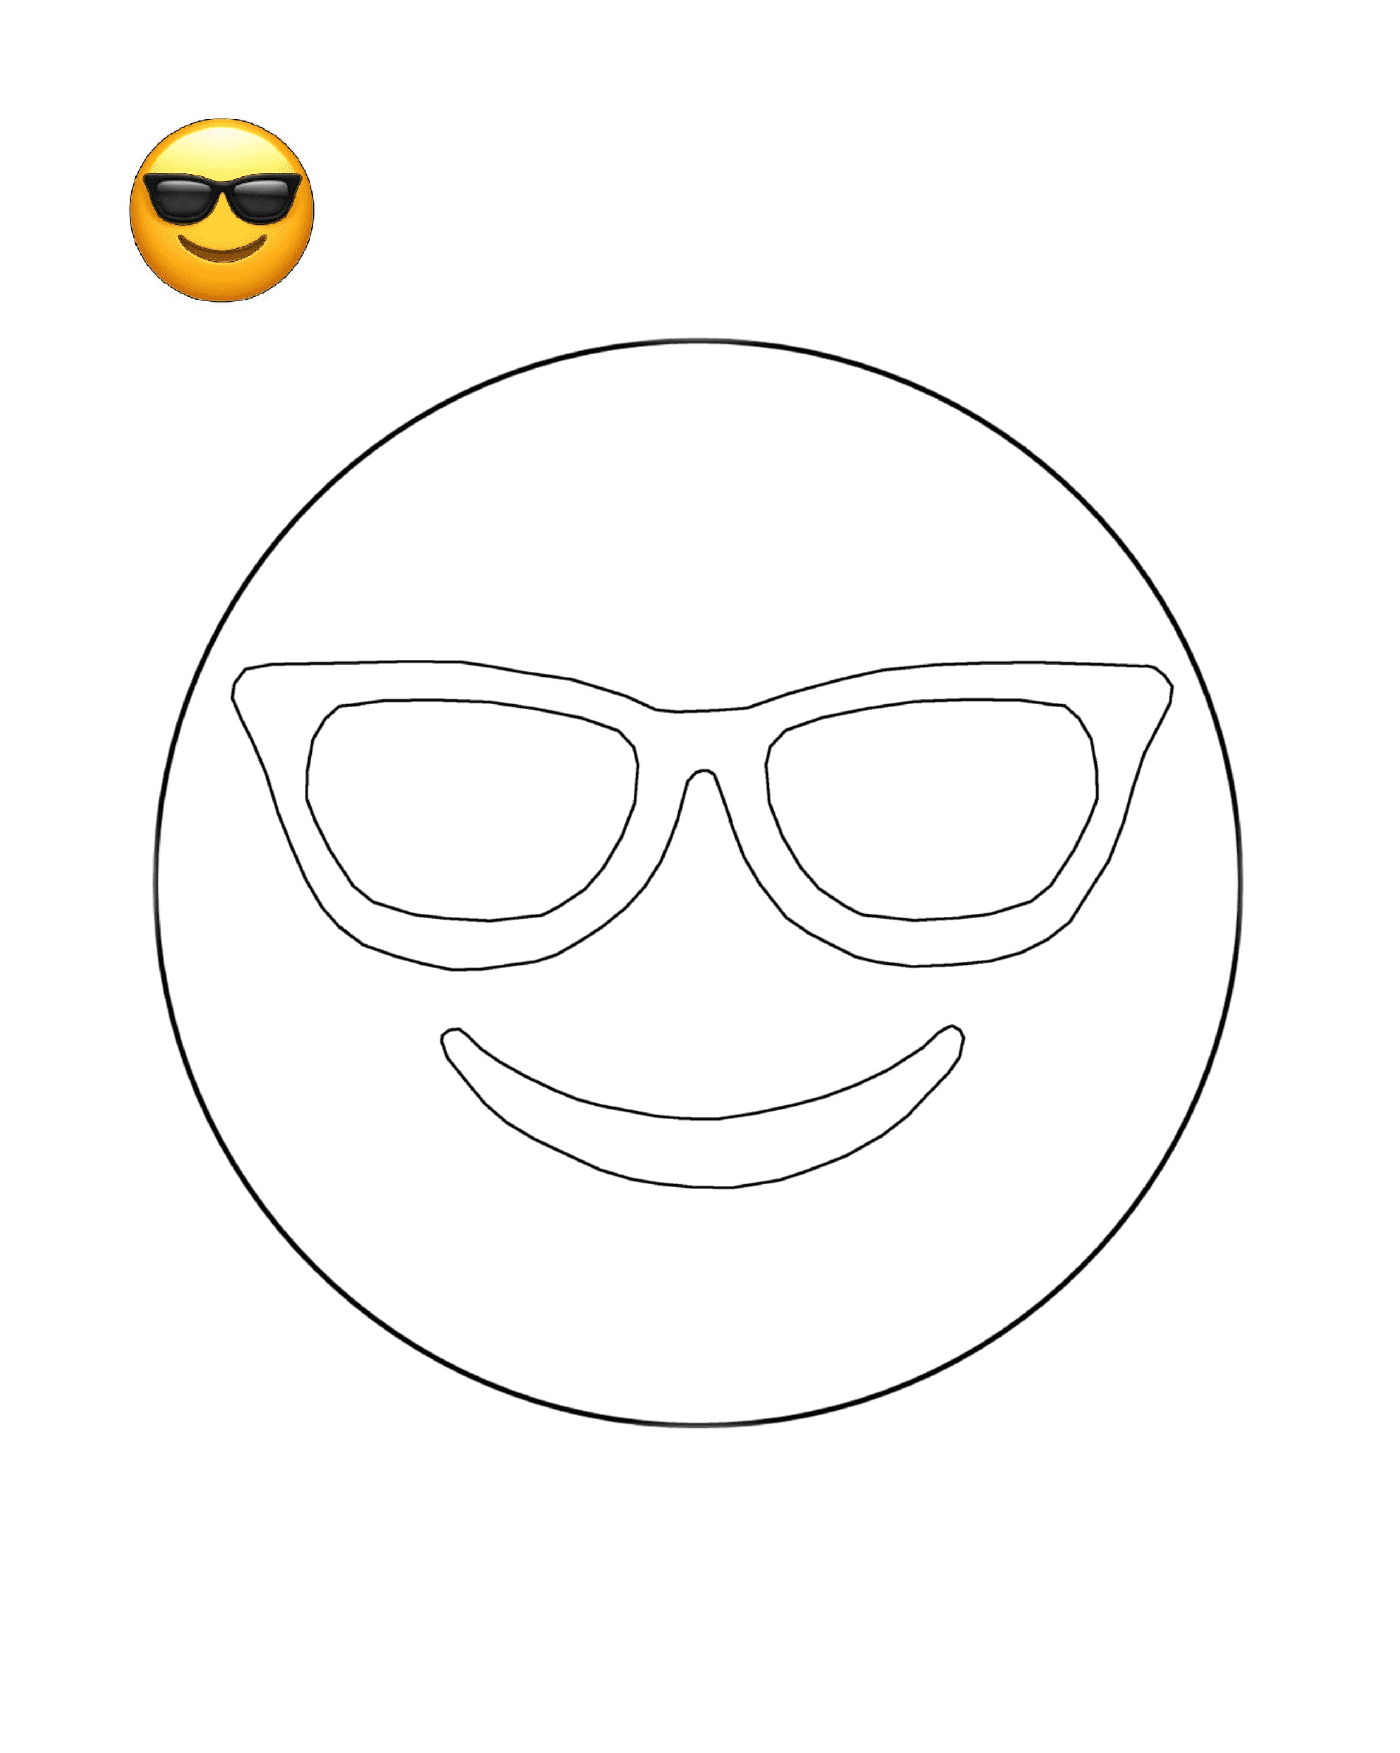  A smiling face wearing sunglasses 